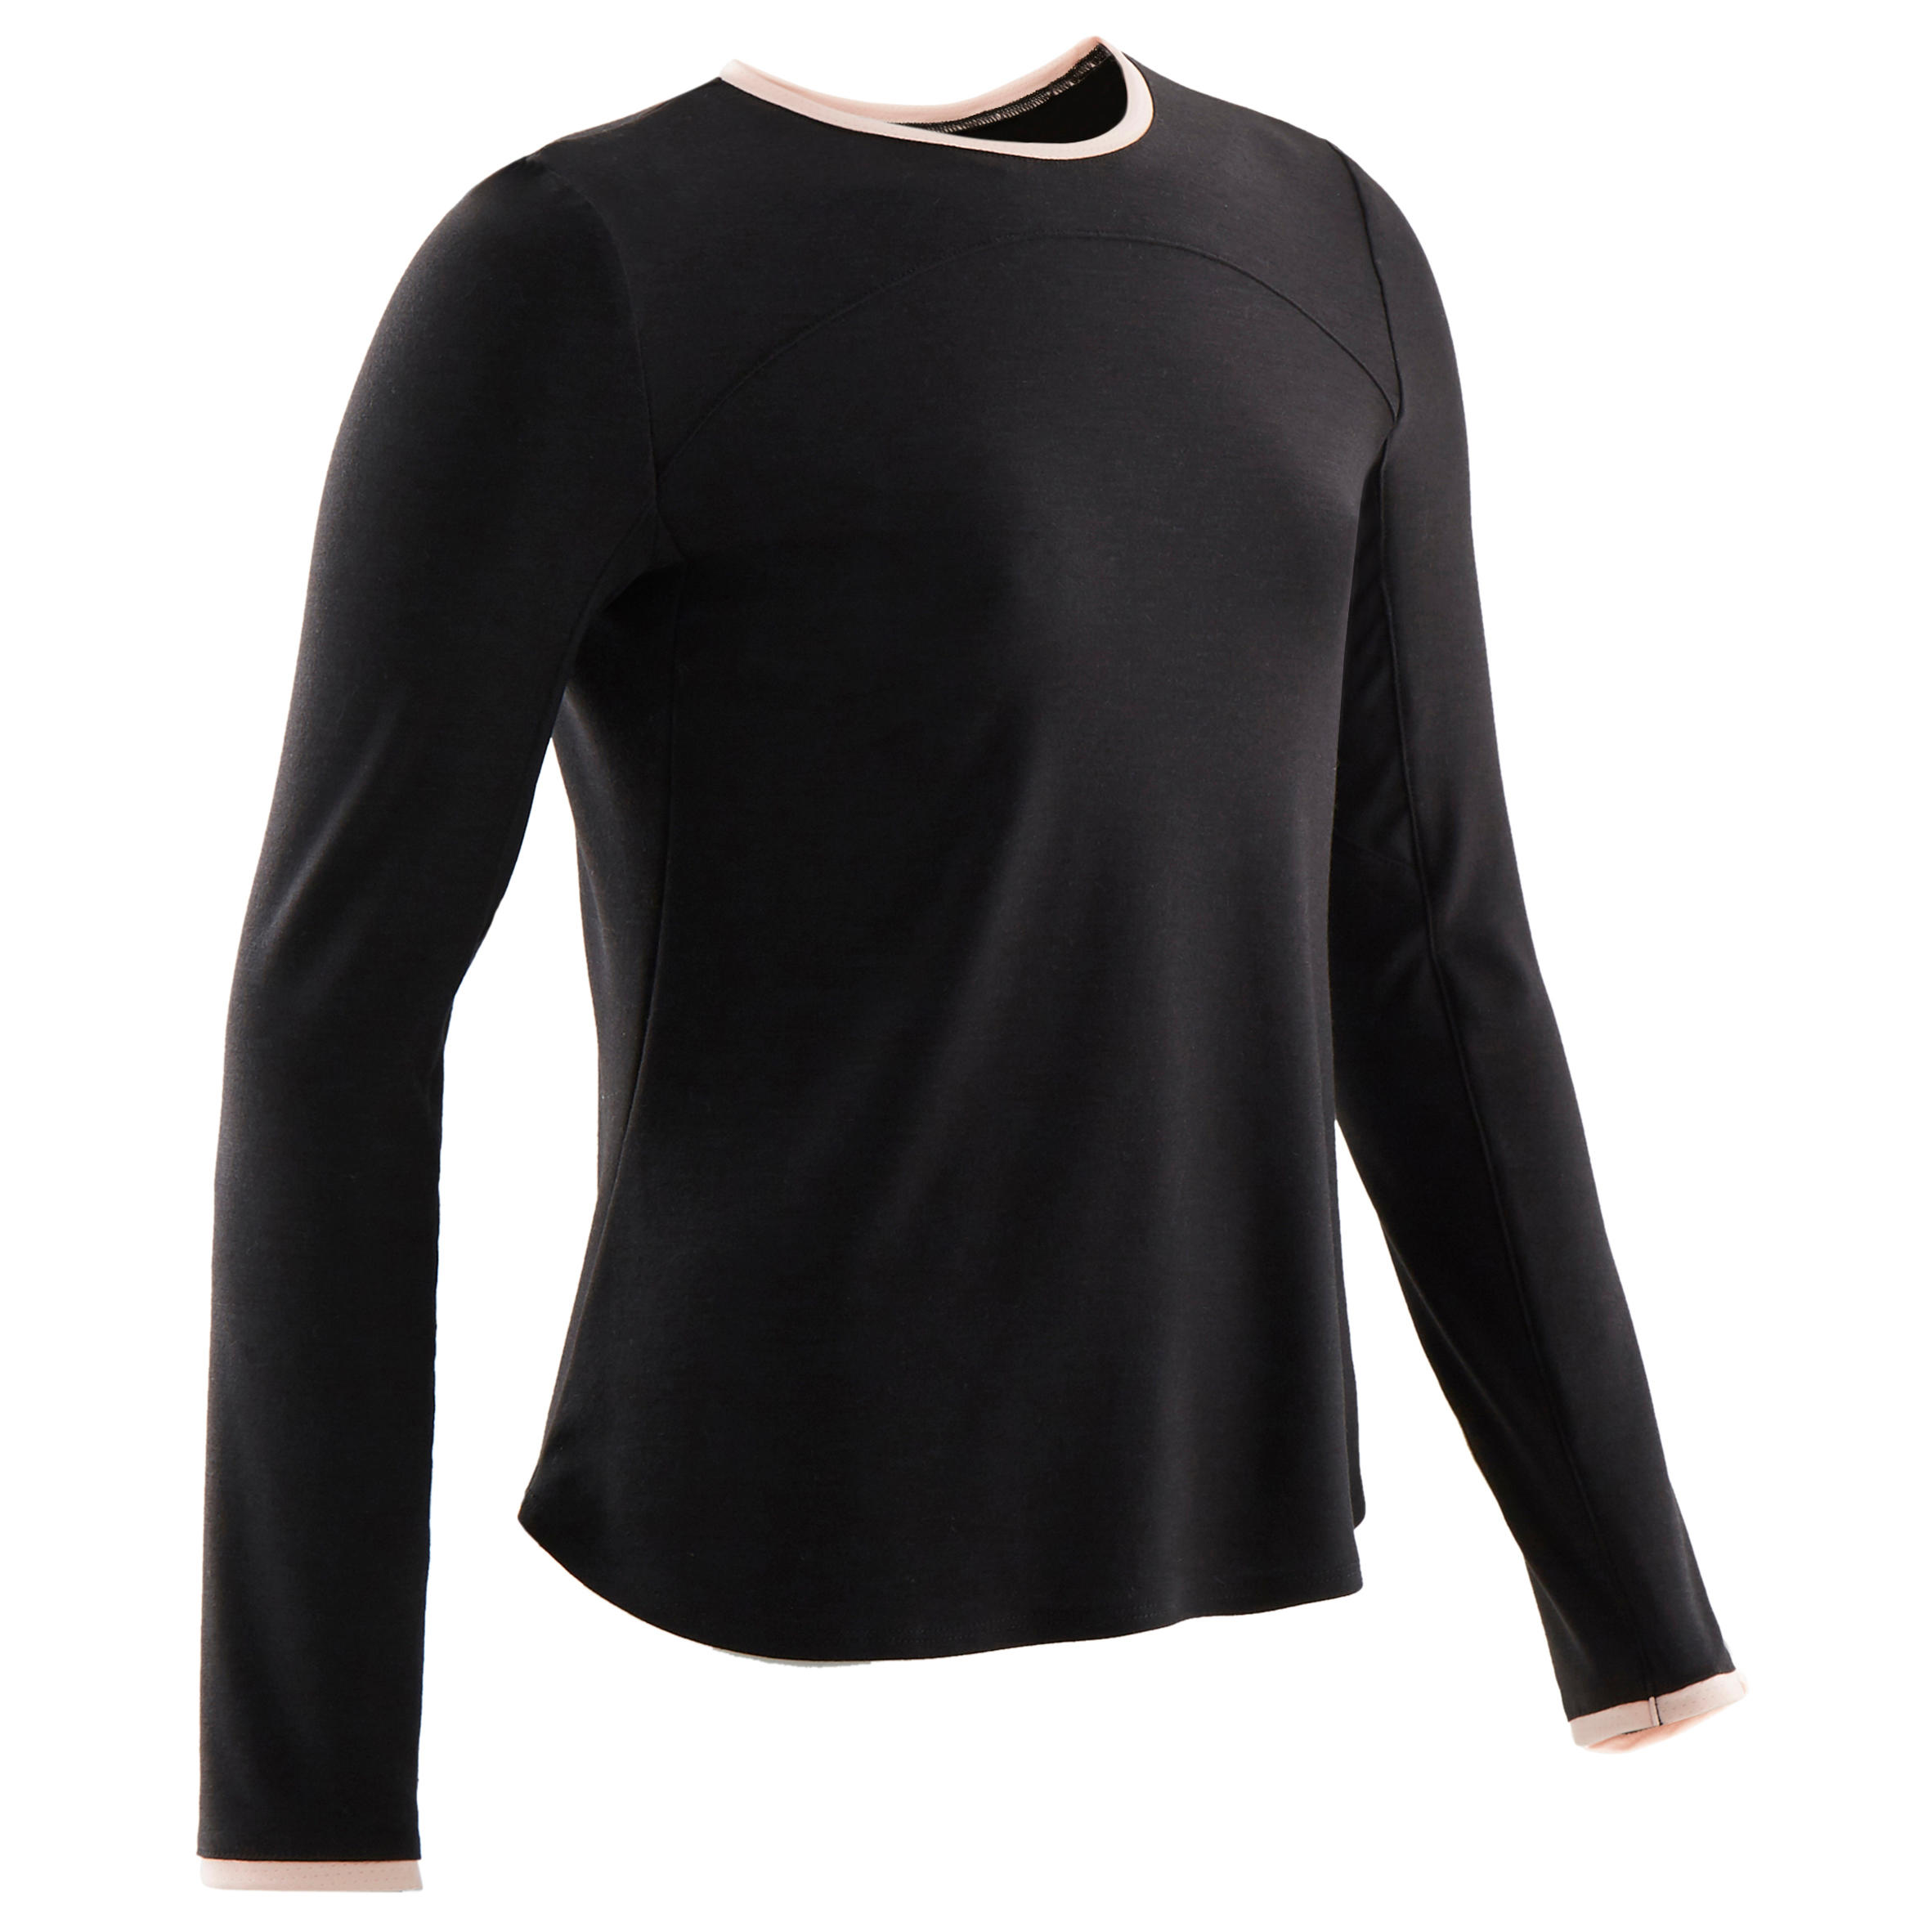 Kids' Long-Sleeved Breathable Cotton Gym T-Shirt 500 - Black/Pink 1/6